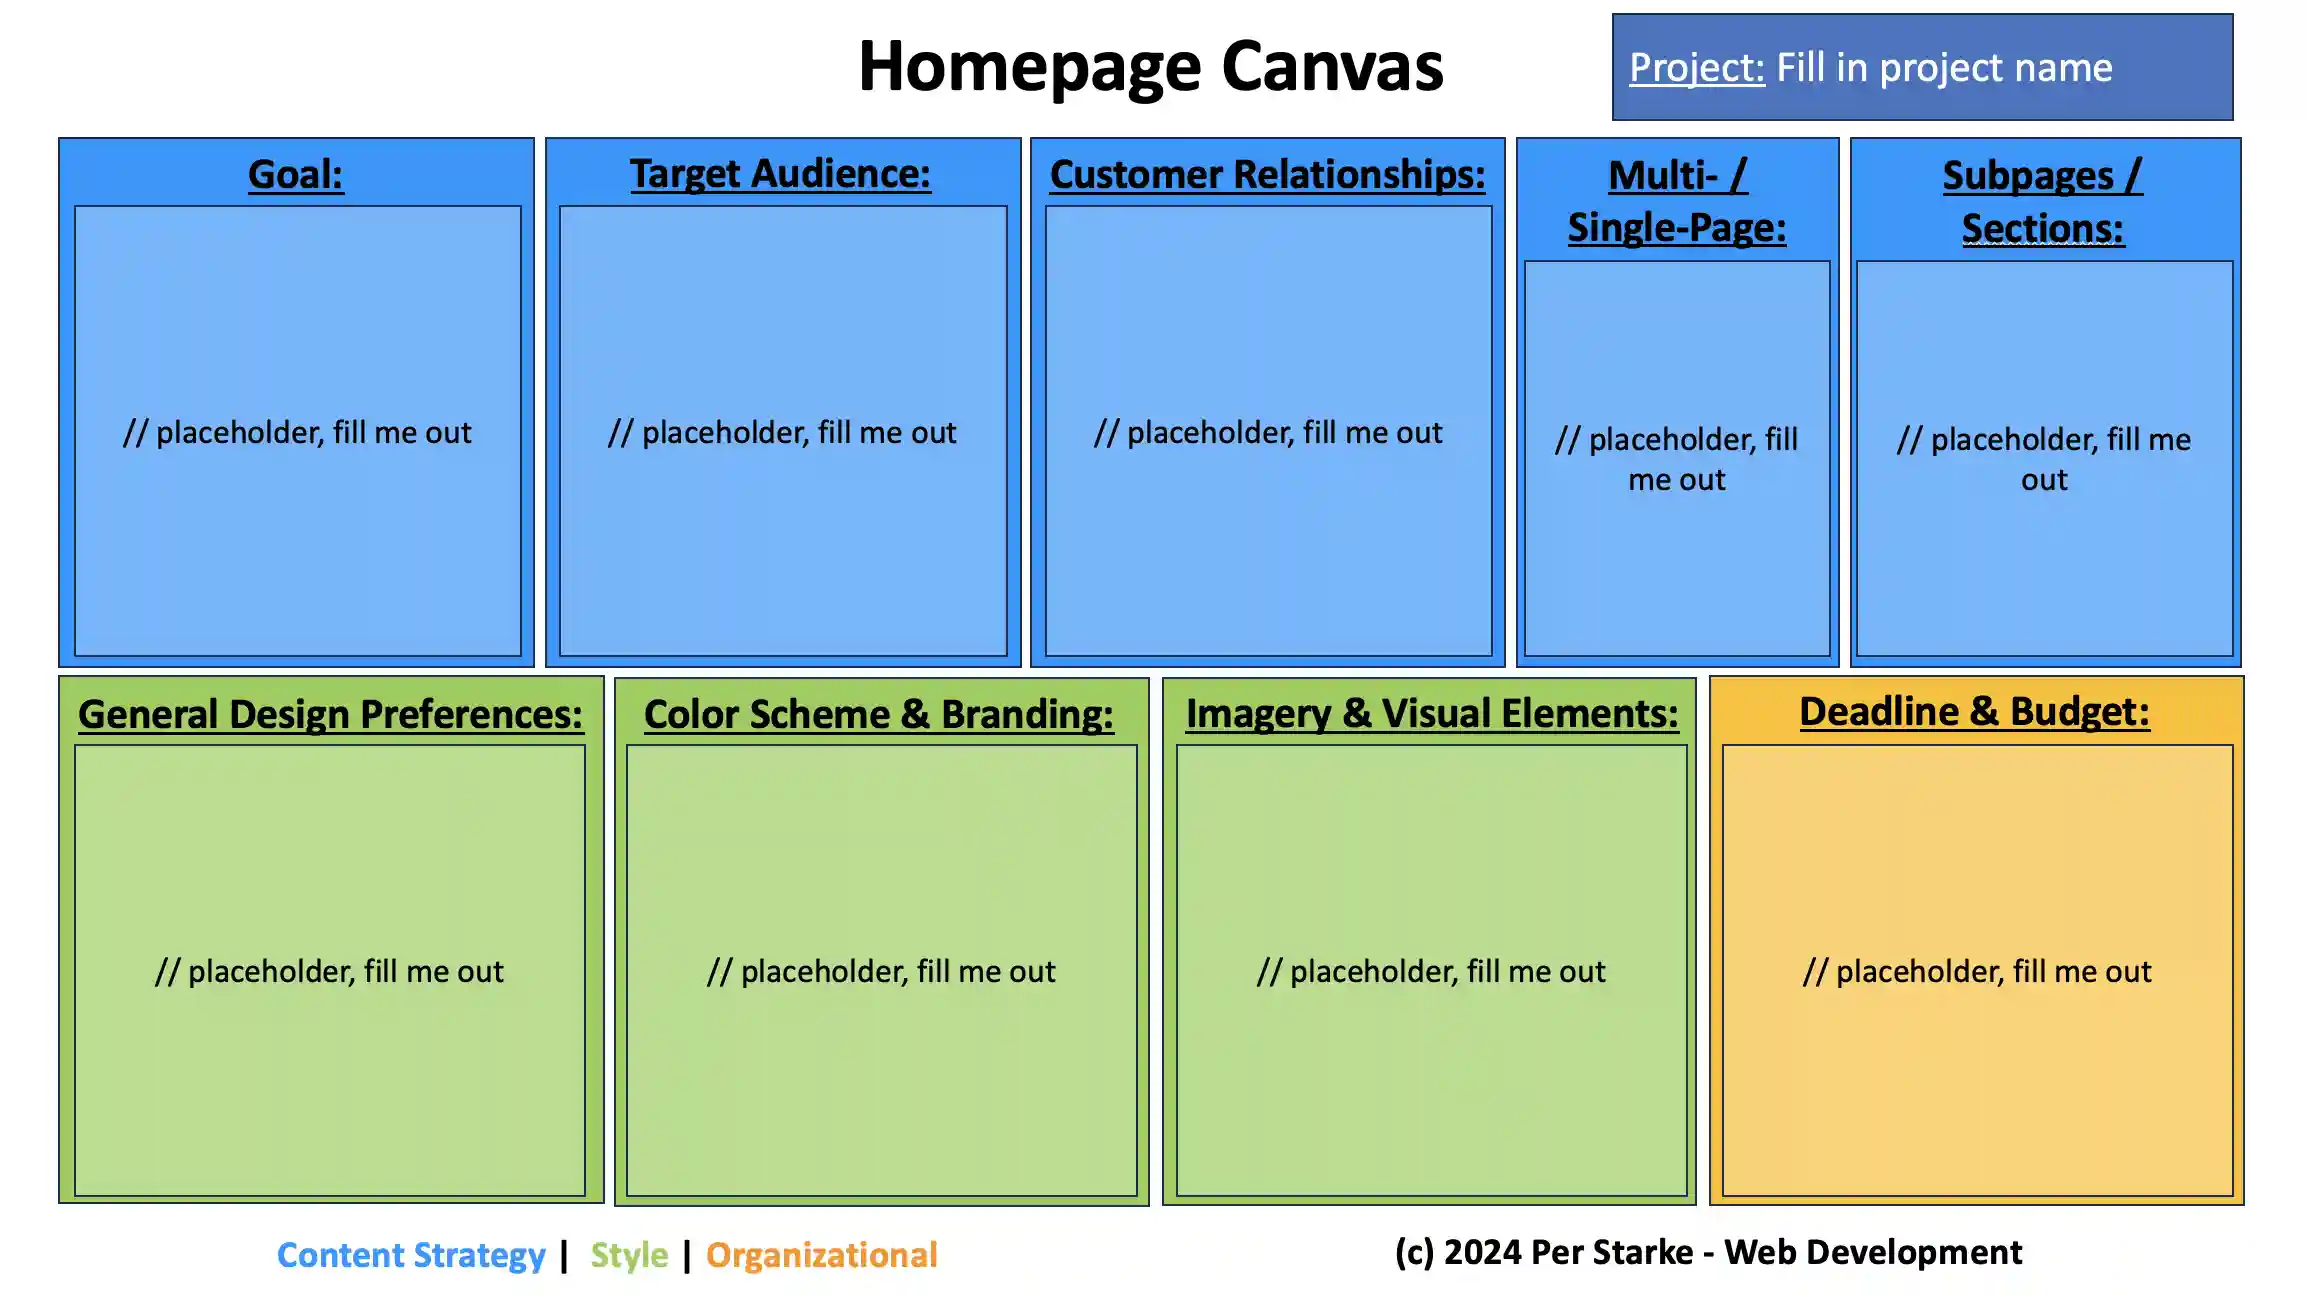 Homepage Canvas